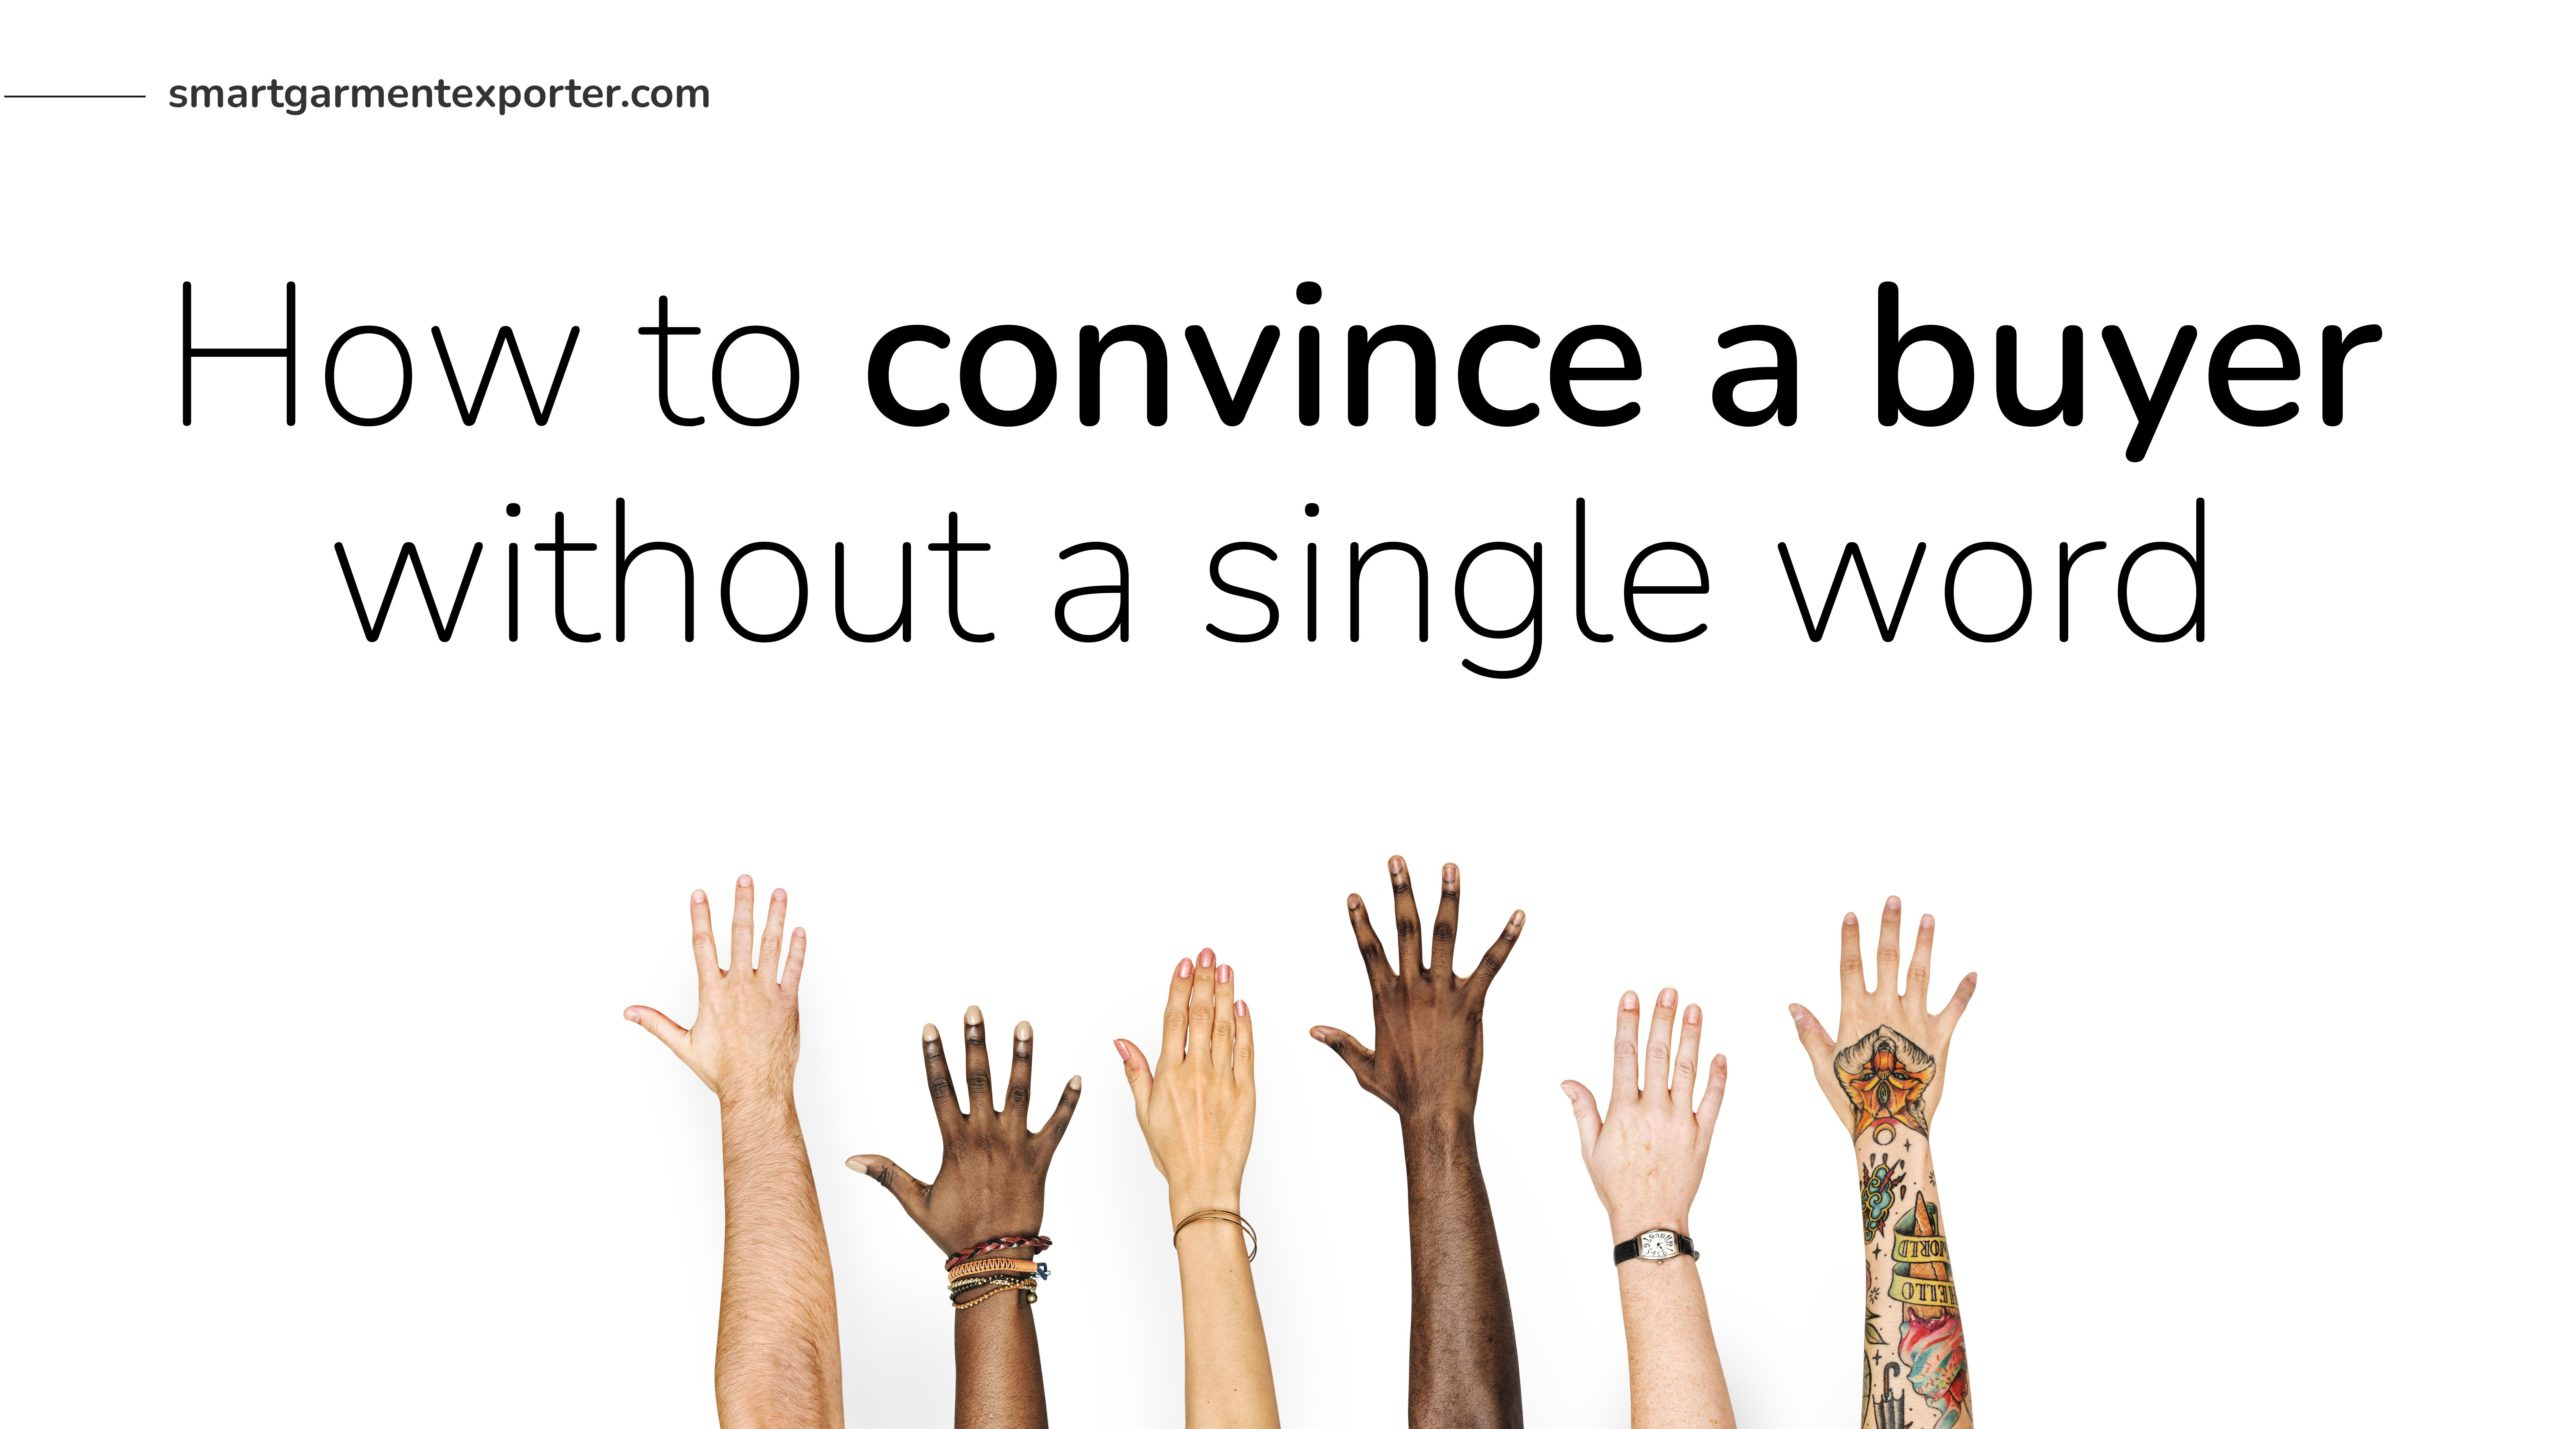 How to convince and convert a buyer without a single word